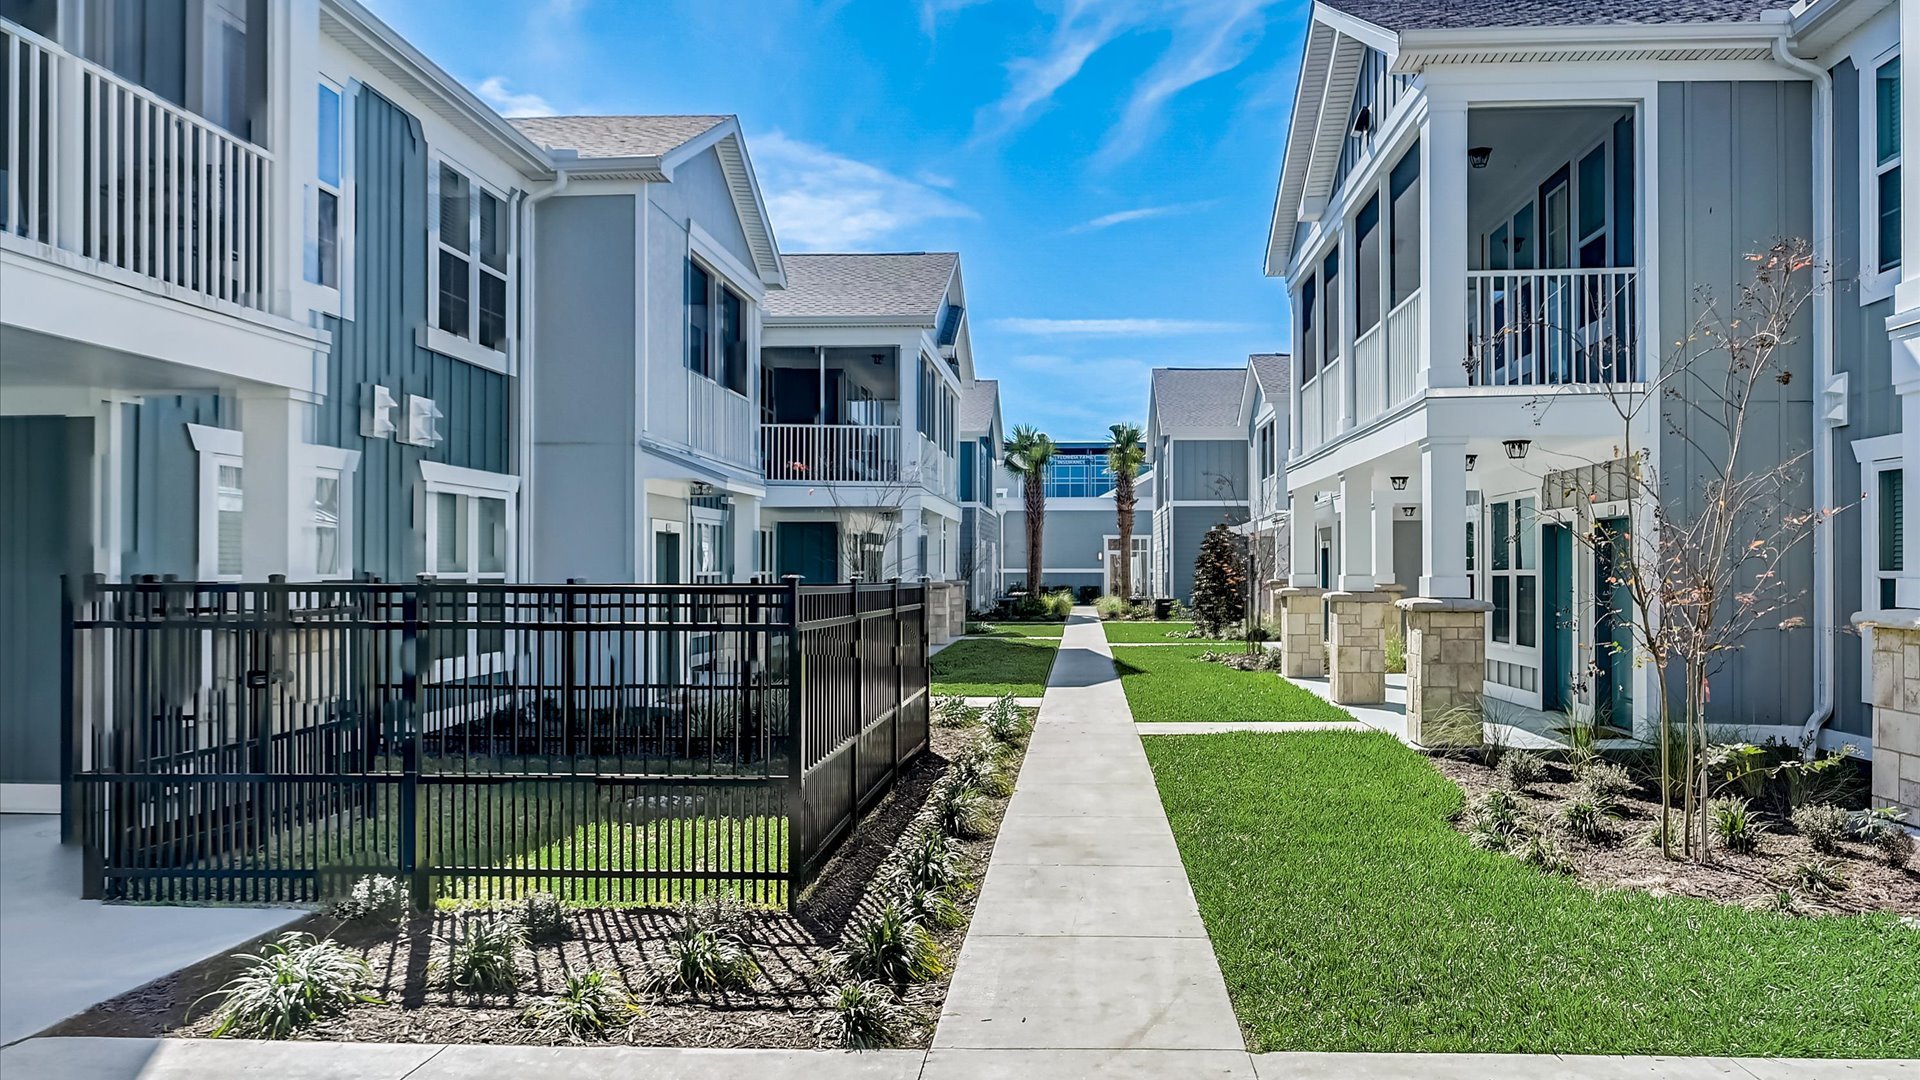 Gated Yard and Sidewalk through Community at Springs at Flagler Center Apartments in Jacksonville, FL